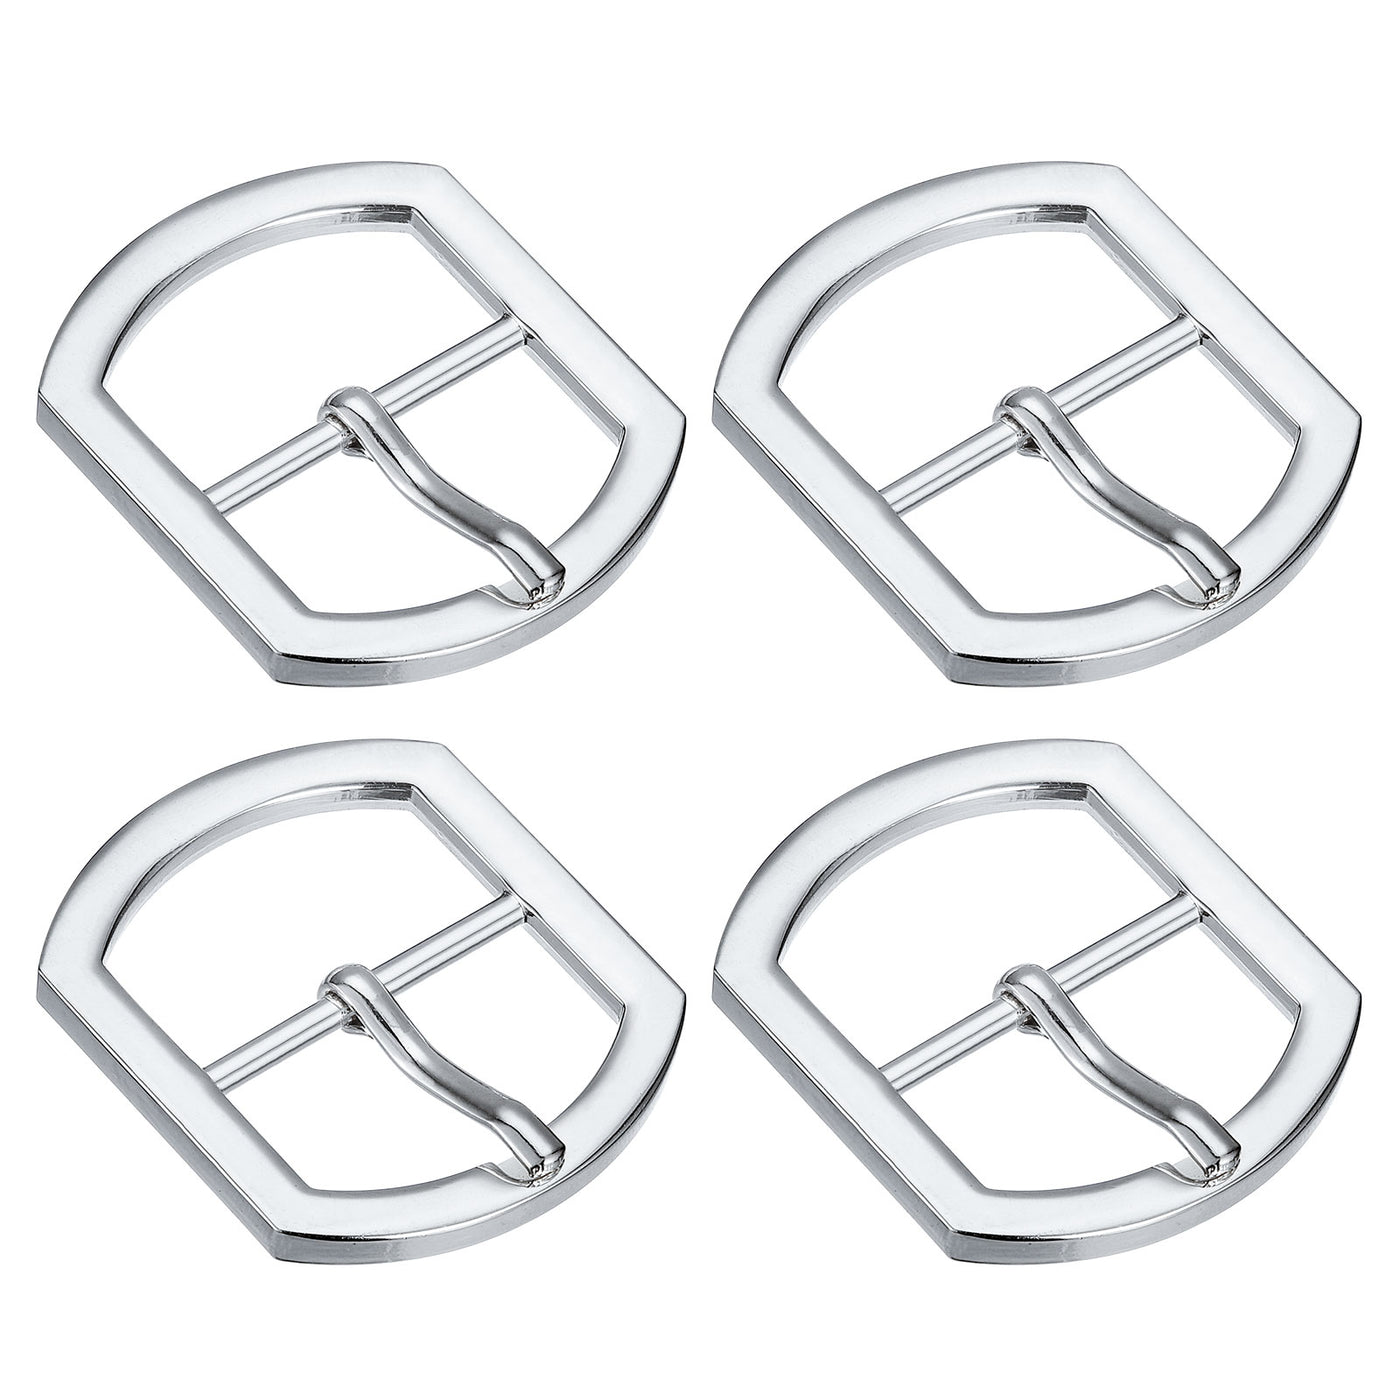 uxcell Uxcell 4Pcs 0.98" Single Prong Belt Buckle Square Center Bar Buckles for Belt, White